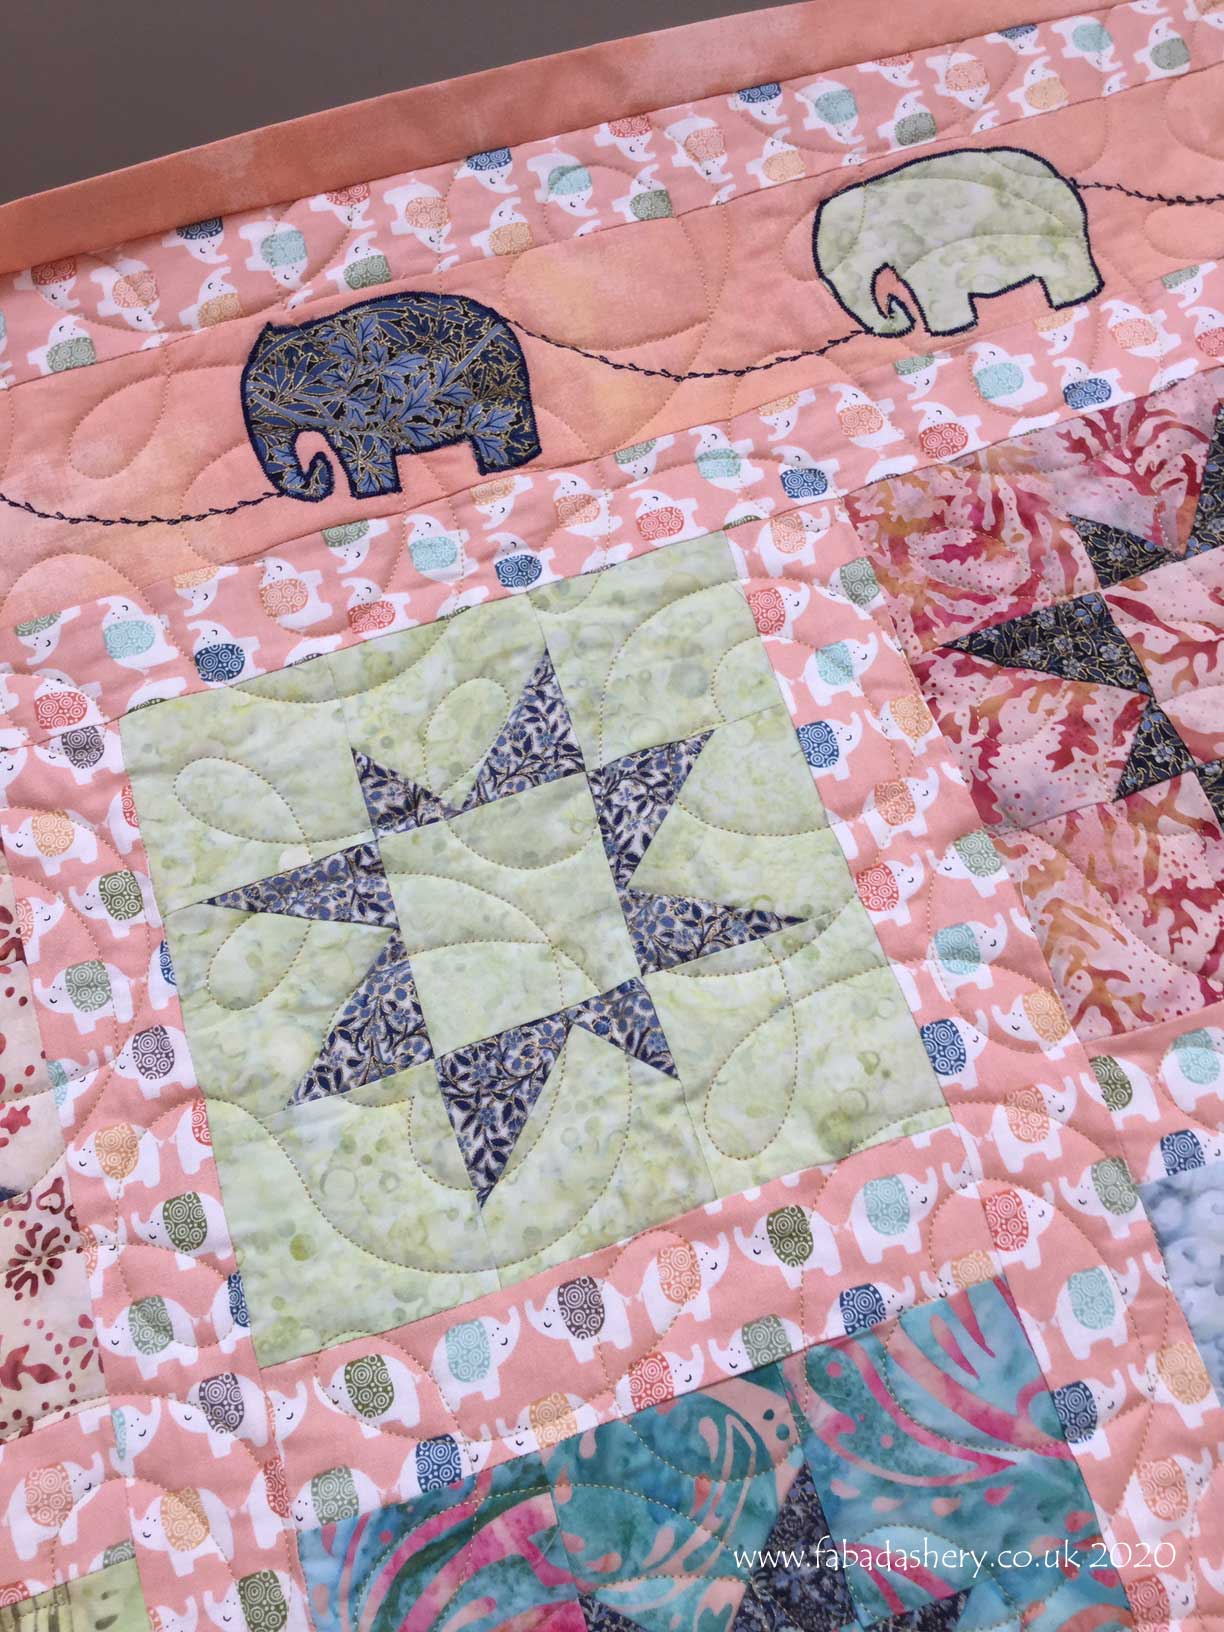 Fabadashery Longarm Quilting: Pink and Blue Elephant Quiltmade by Marie ...